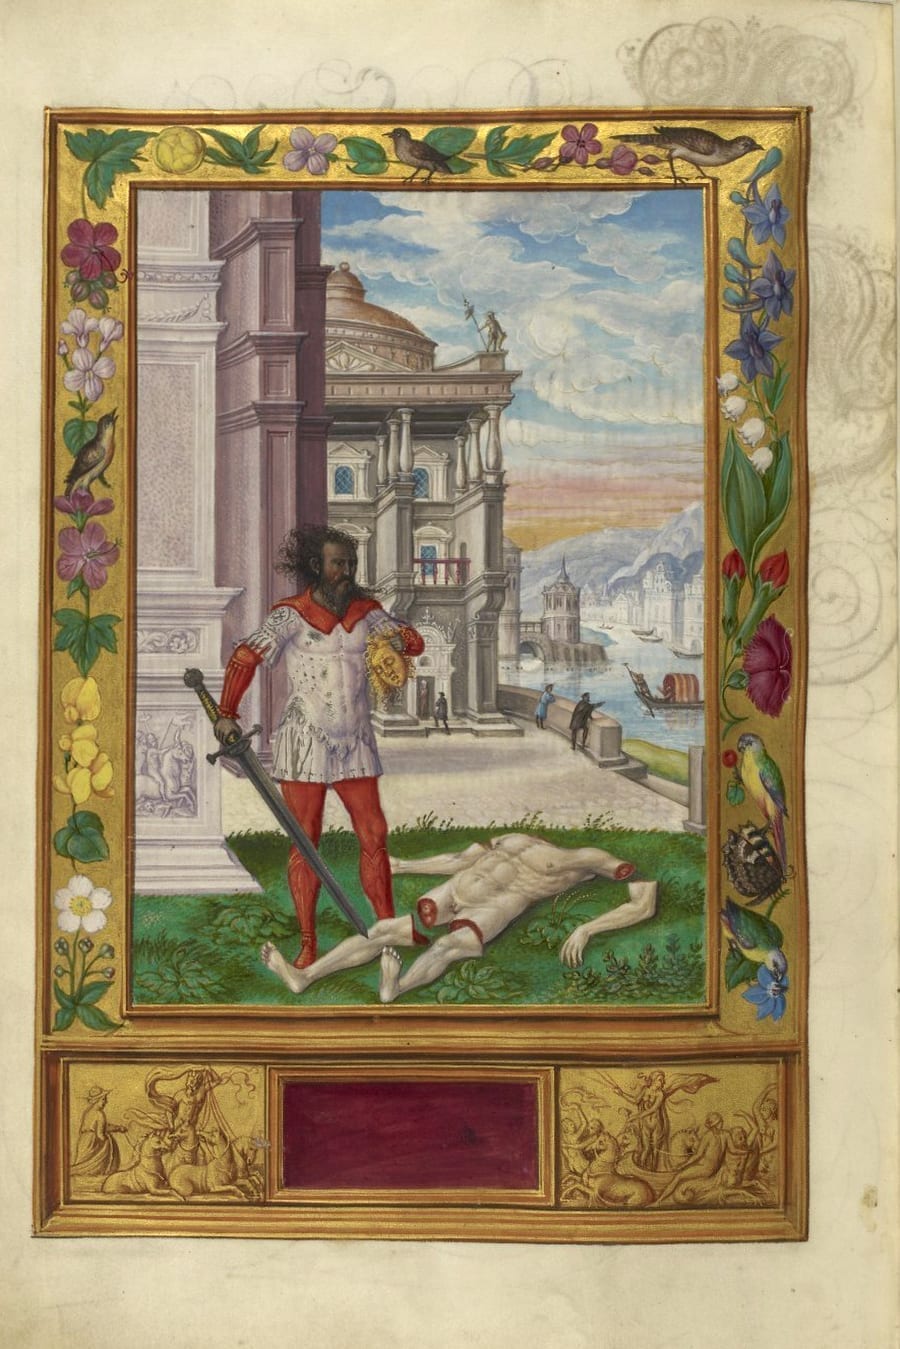 Illustration of man with a sword from the Alchemical manuscript Splendor Solis